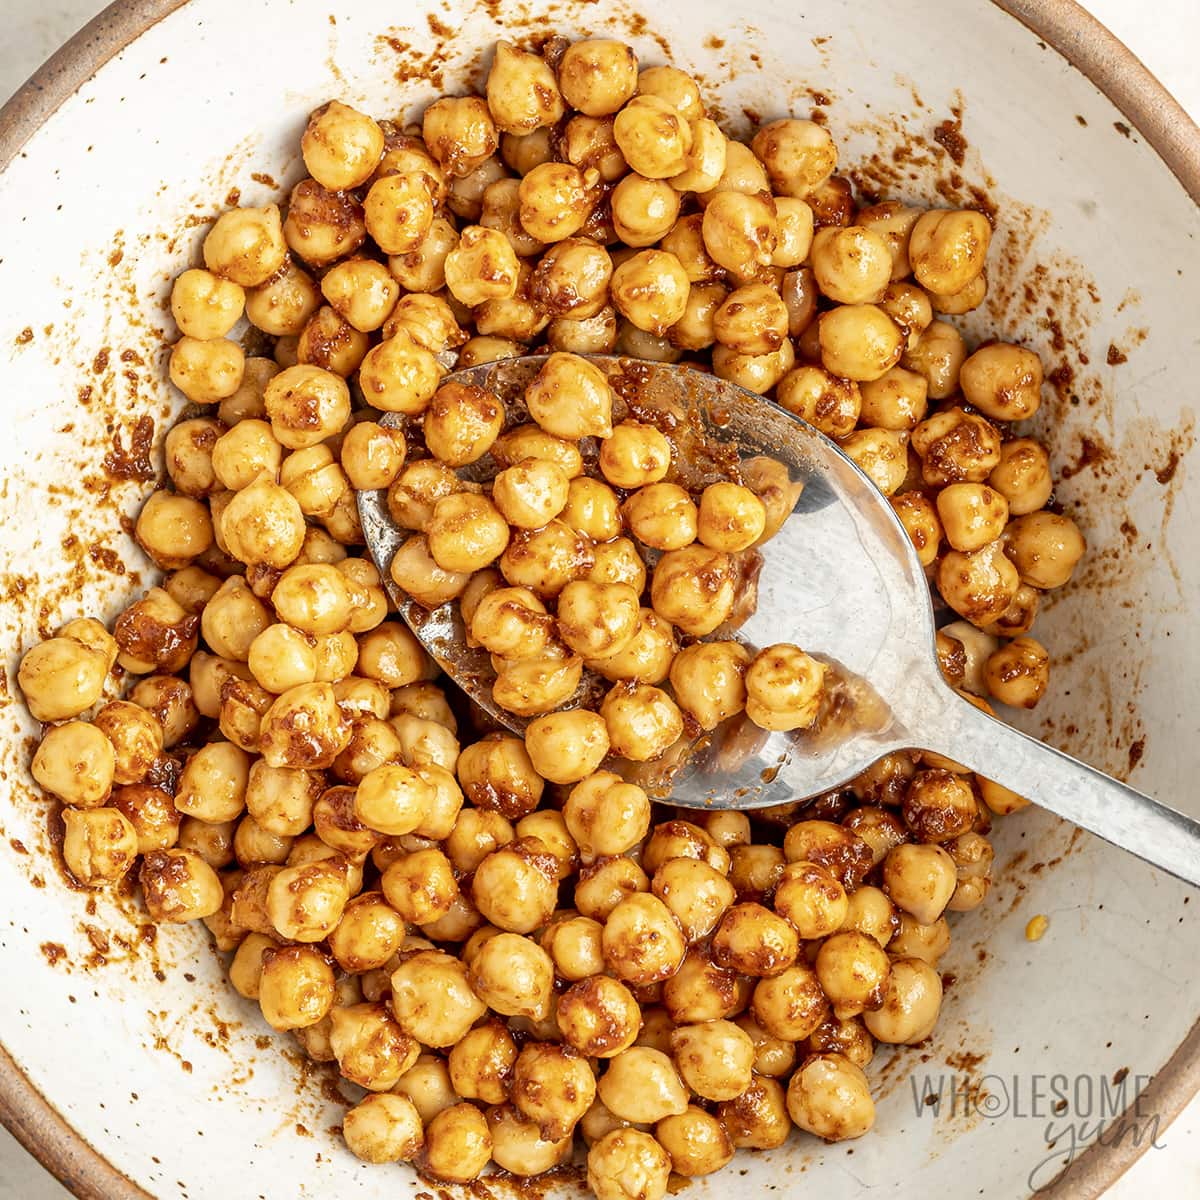 Chickpeas mixed with spices in a bowl.